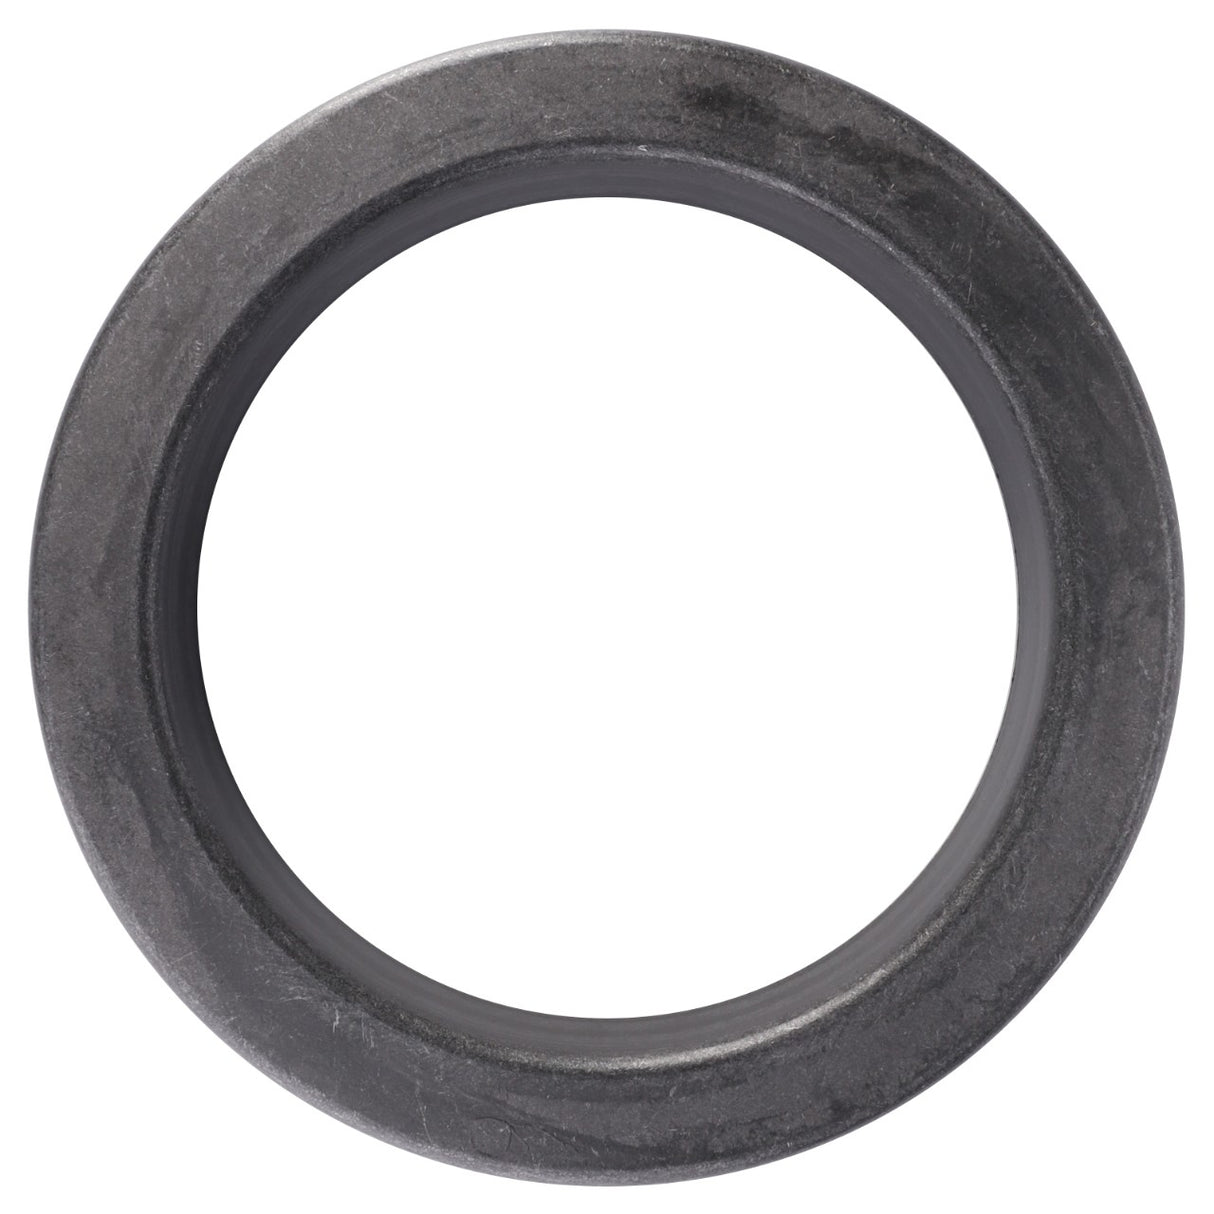 AGCO | Sealing Ring, Joint Housing - F835300020850